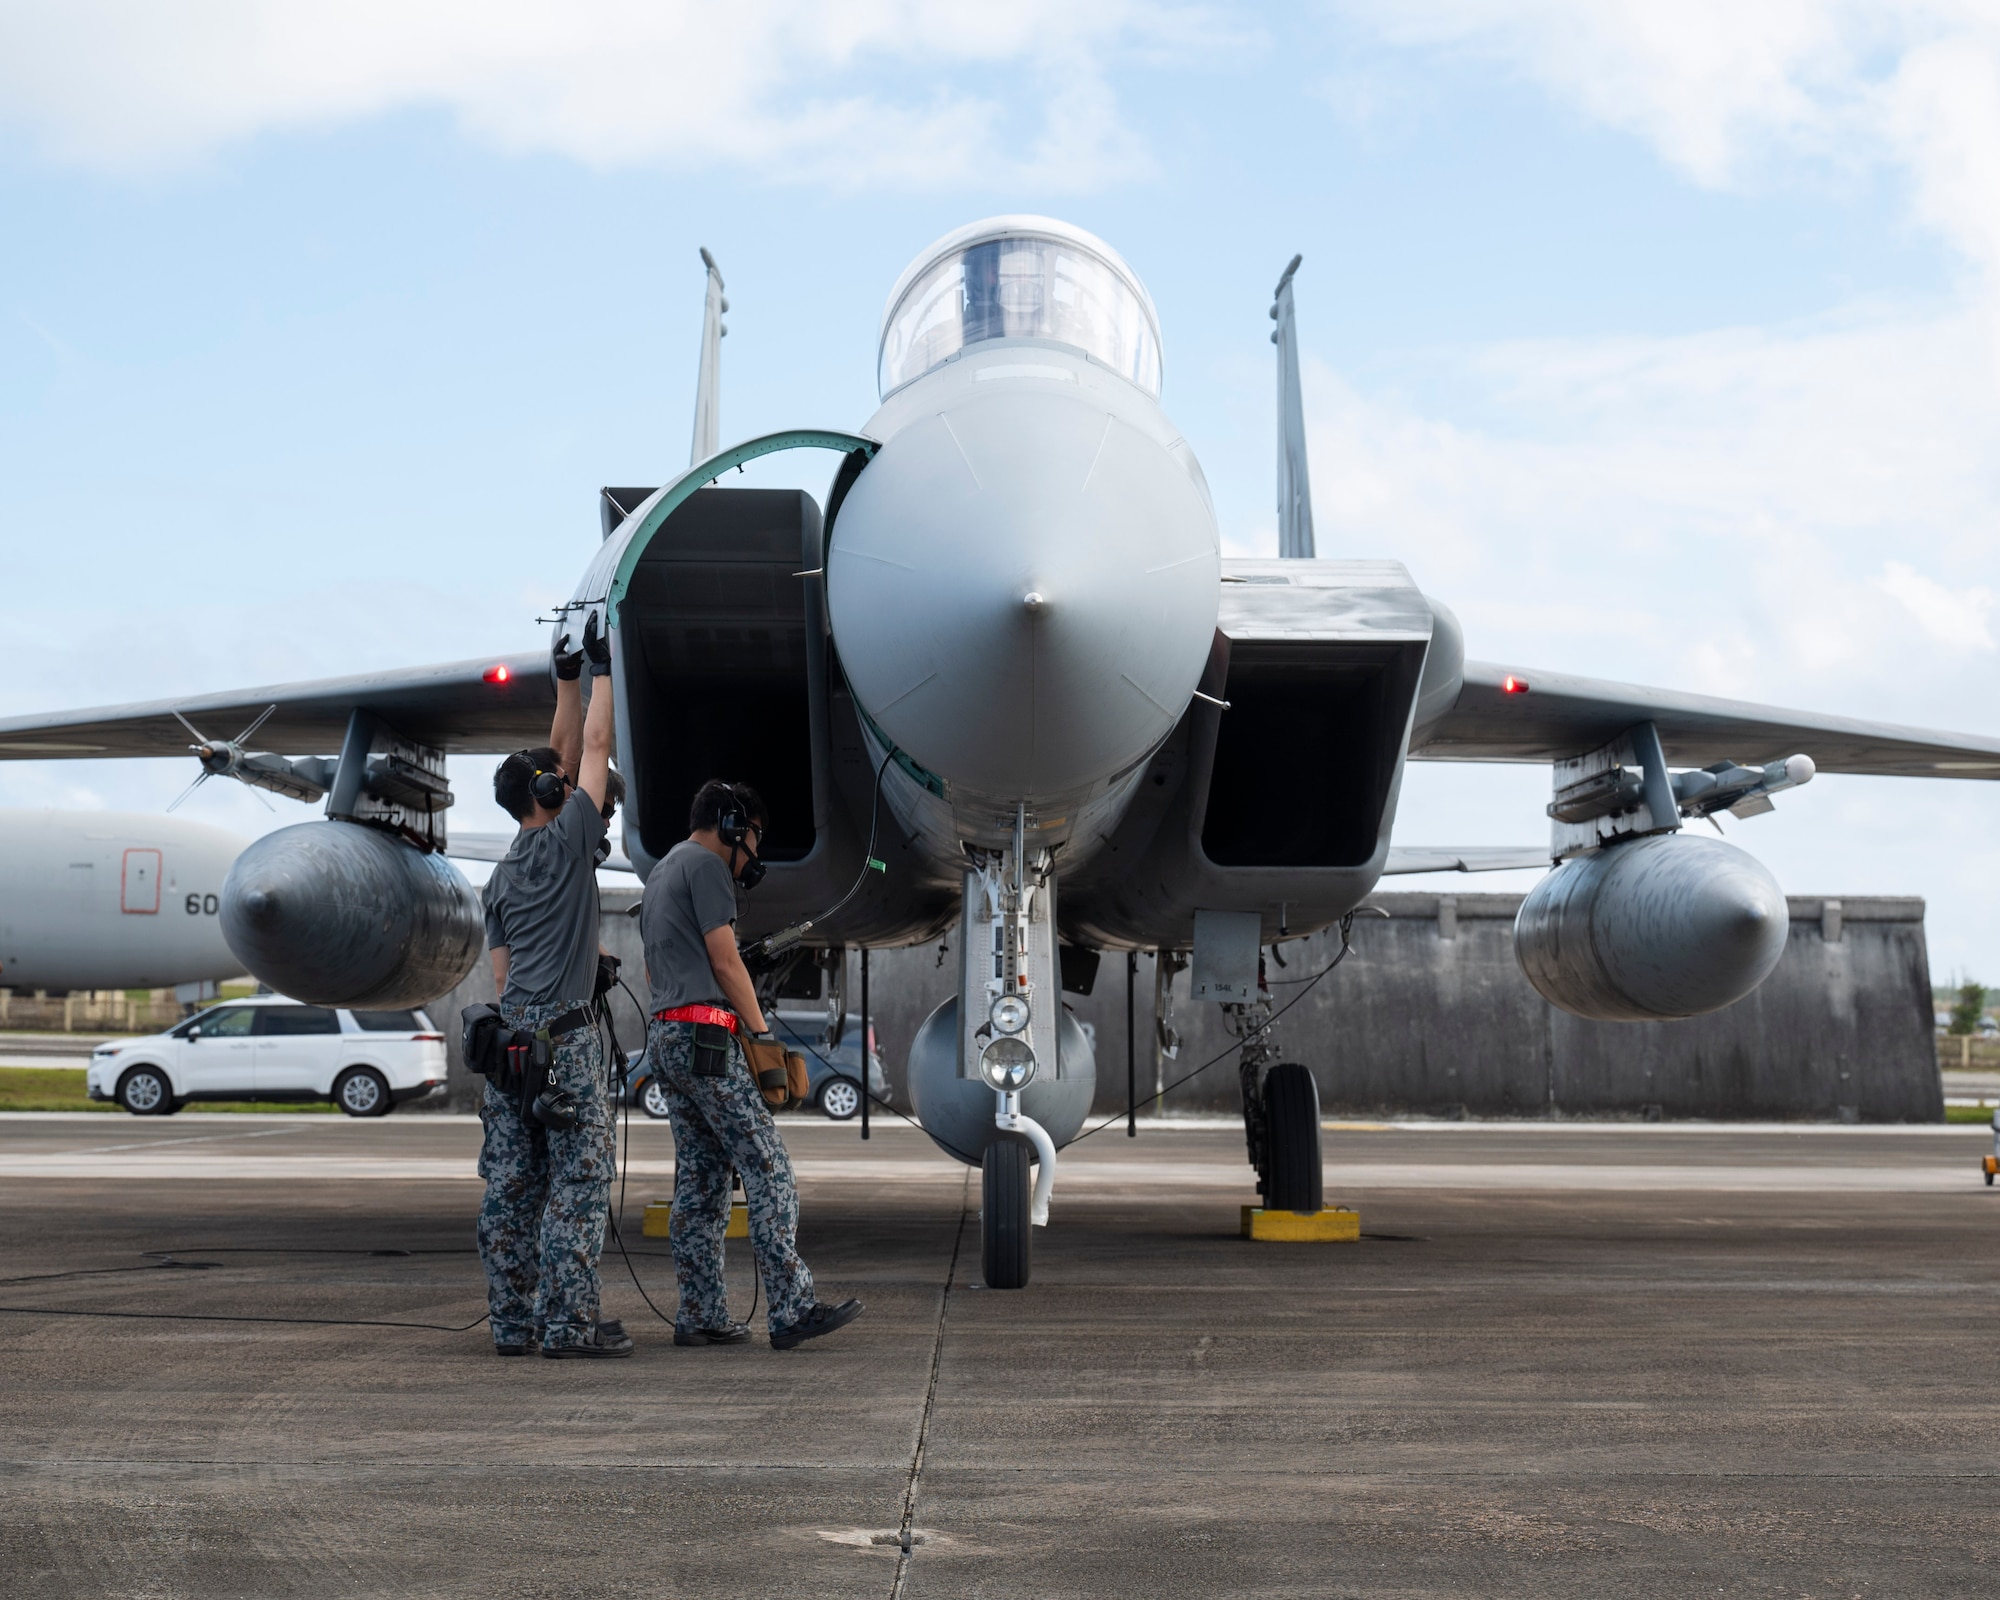 Members of the Japan Air Self-Defense Force perform checks on a F-15J Eagle during Cope North 24 on Andersen Air Force Base, Guam, Jan. 29, 2024. Cope North enhances U.S. relationships and interoperability with our regional Allies and partners by providing the opportunity to exchange information and improve shared tactics to better integrate multilateral defense capabilities. (U.S. Air Force photo by Airman 1st Class Spencer Perkins)